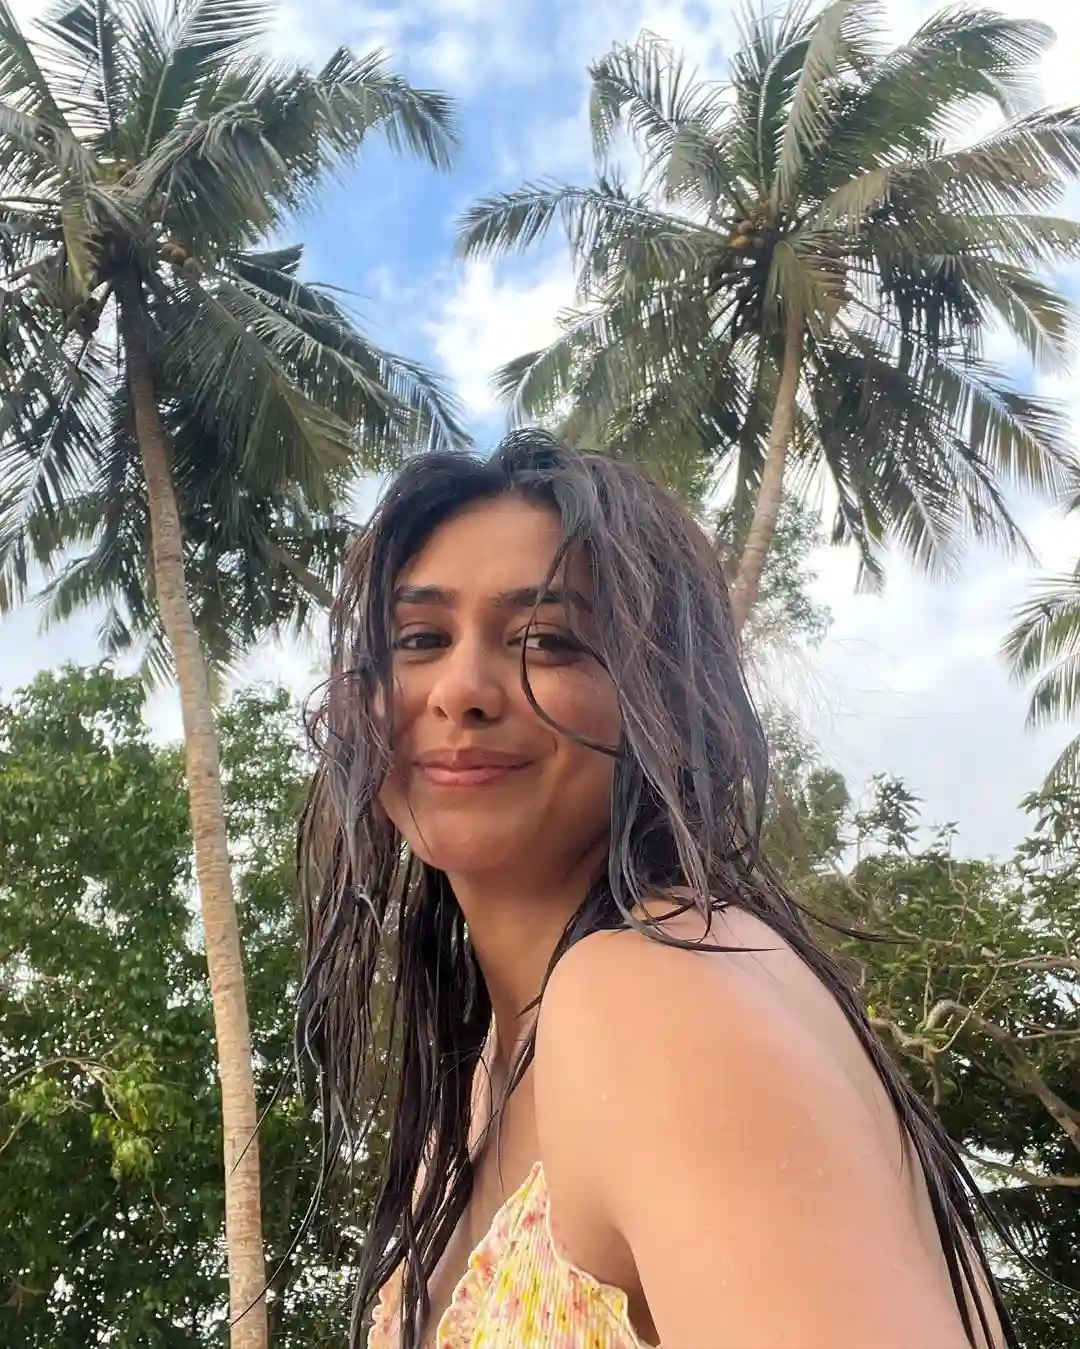 Mrunal Thakur share her holiday pics with fans